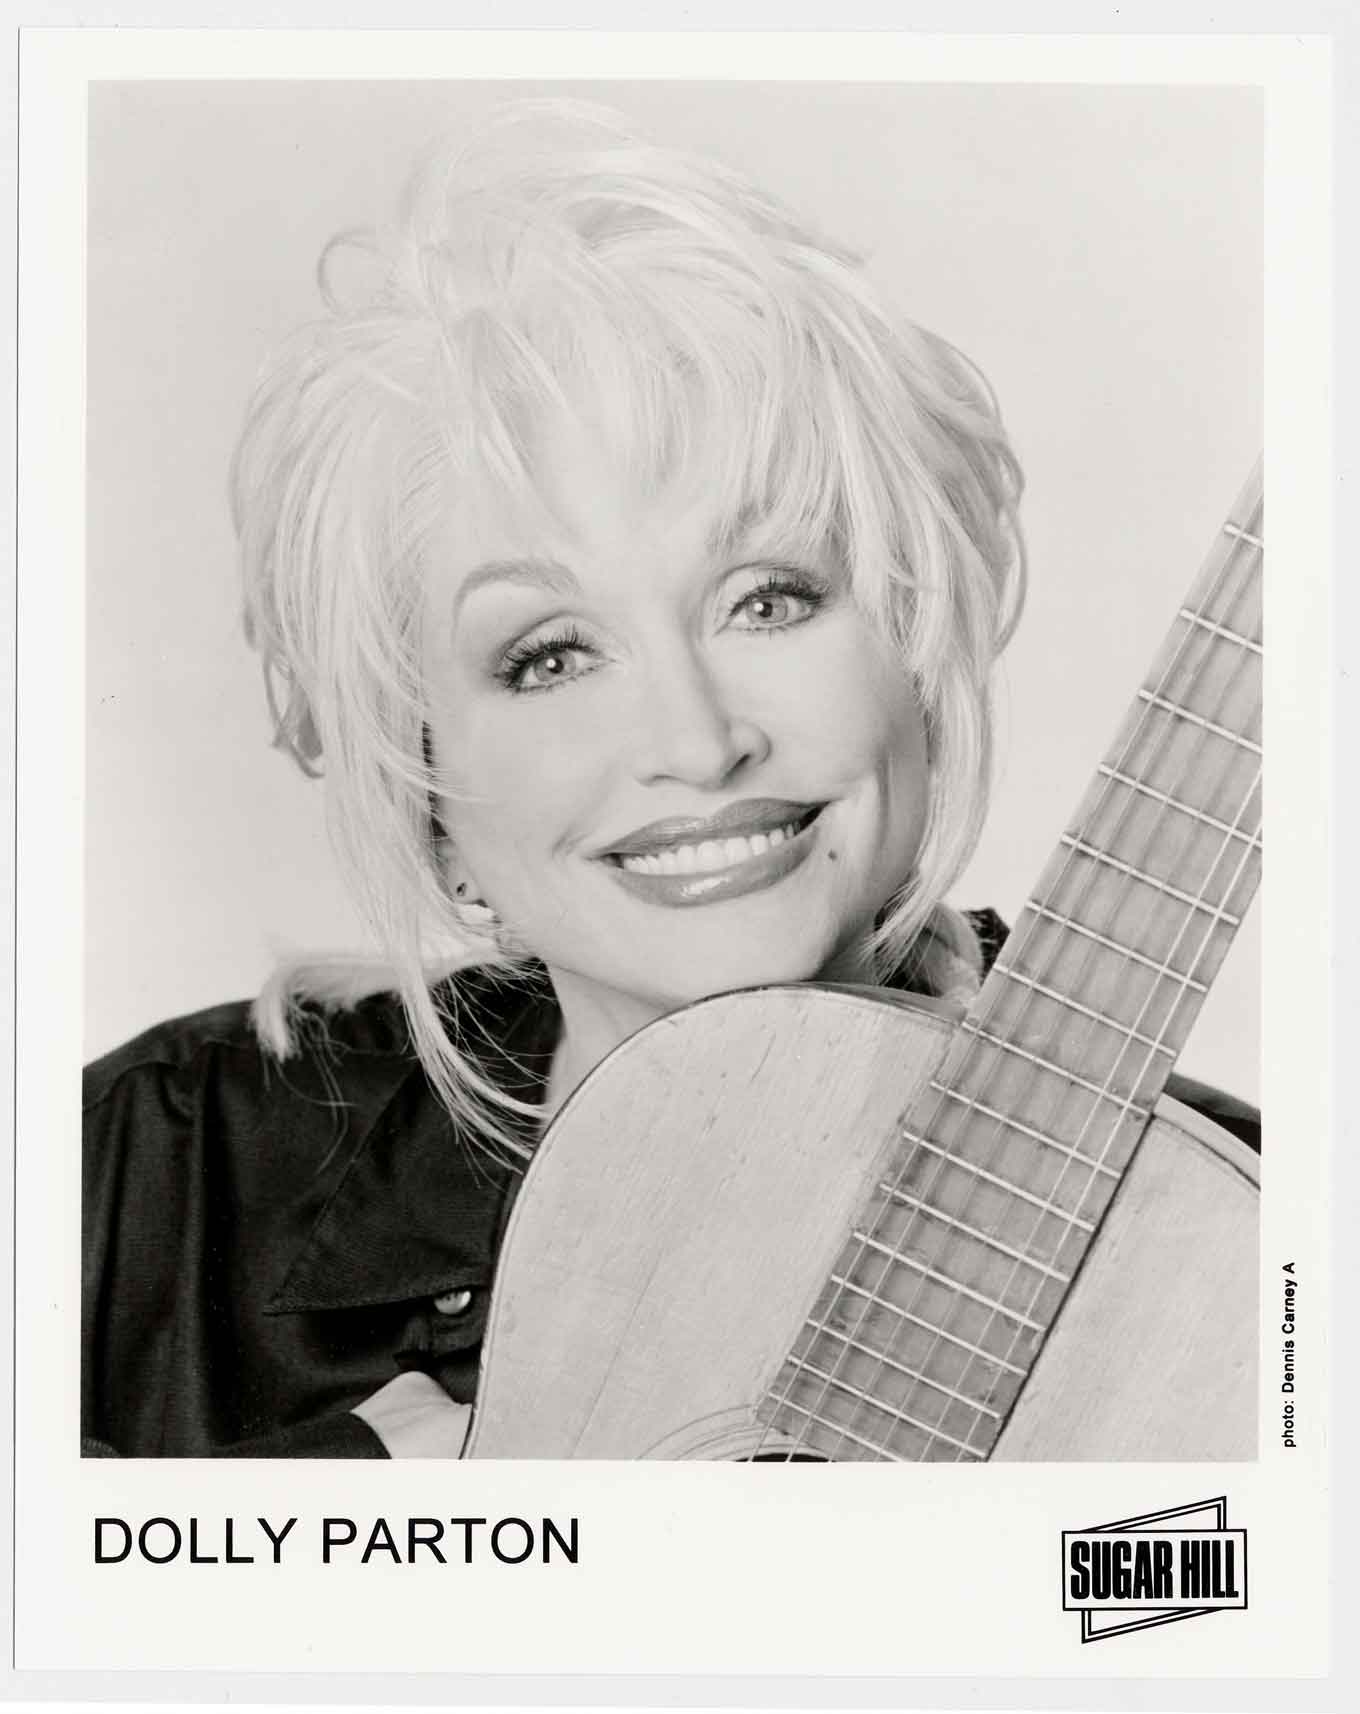 Dolly Parton portrait, smiling with a guitar